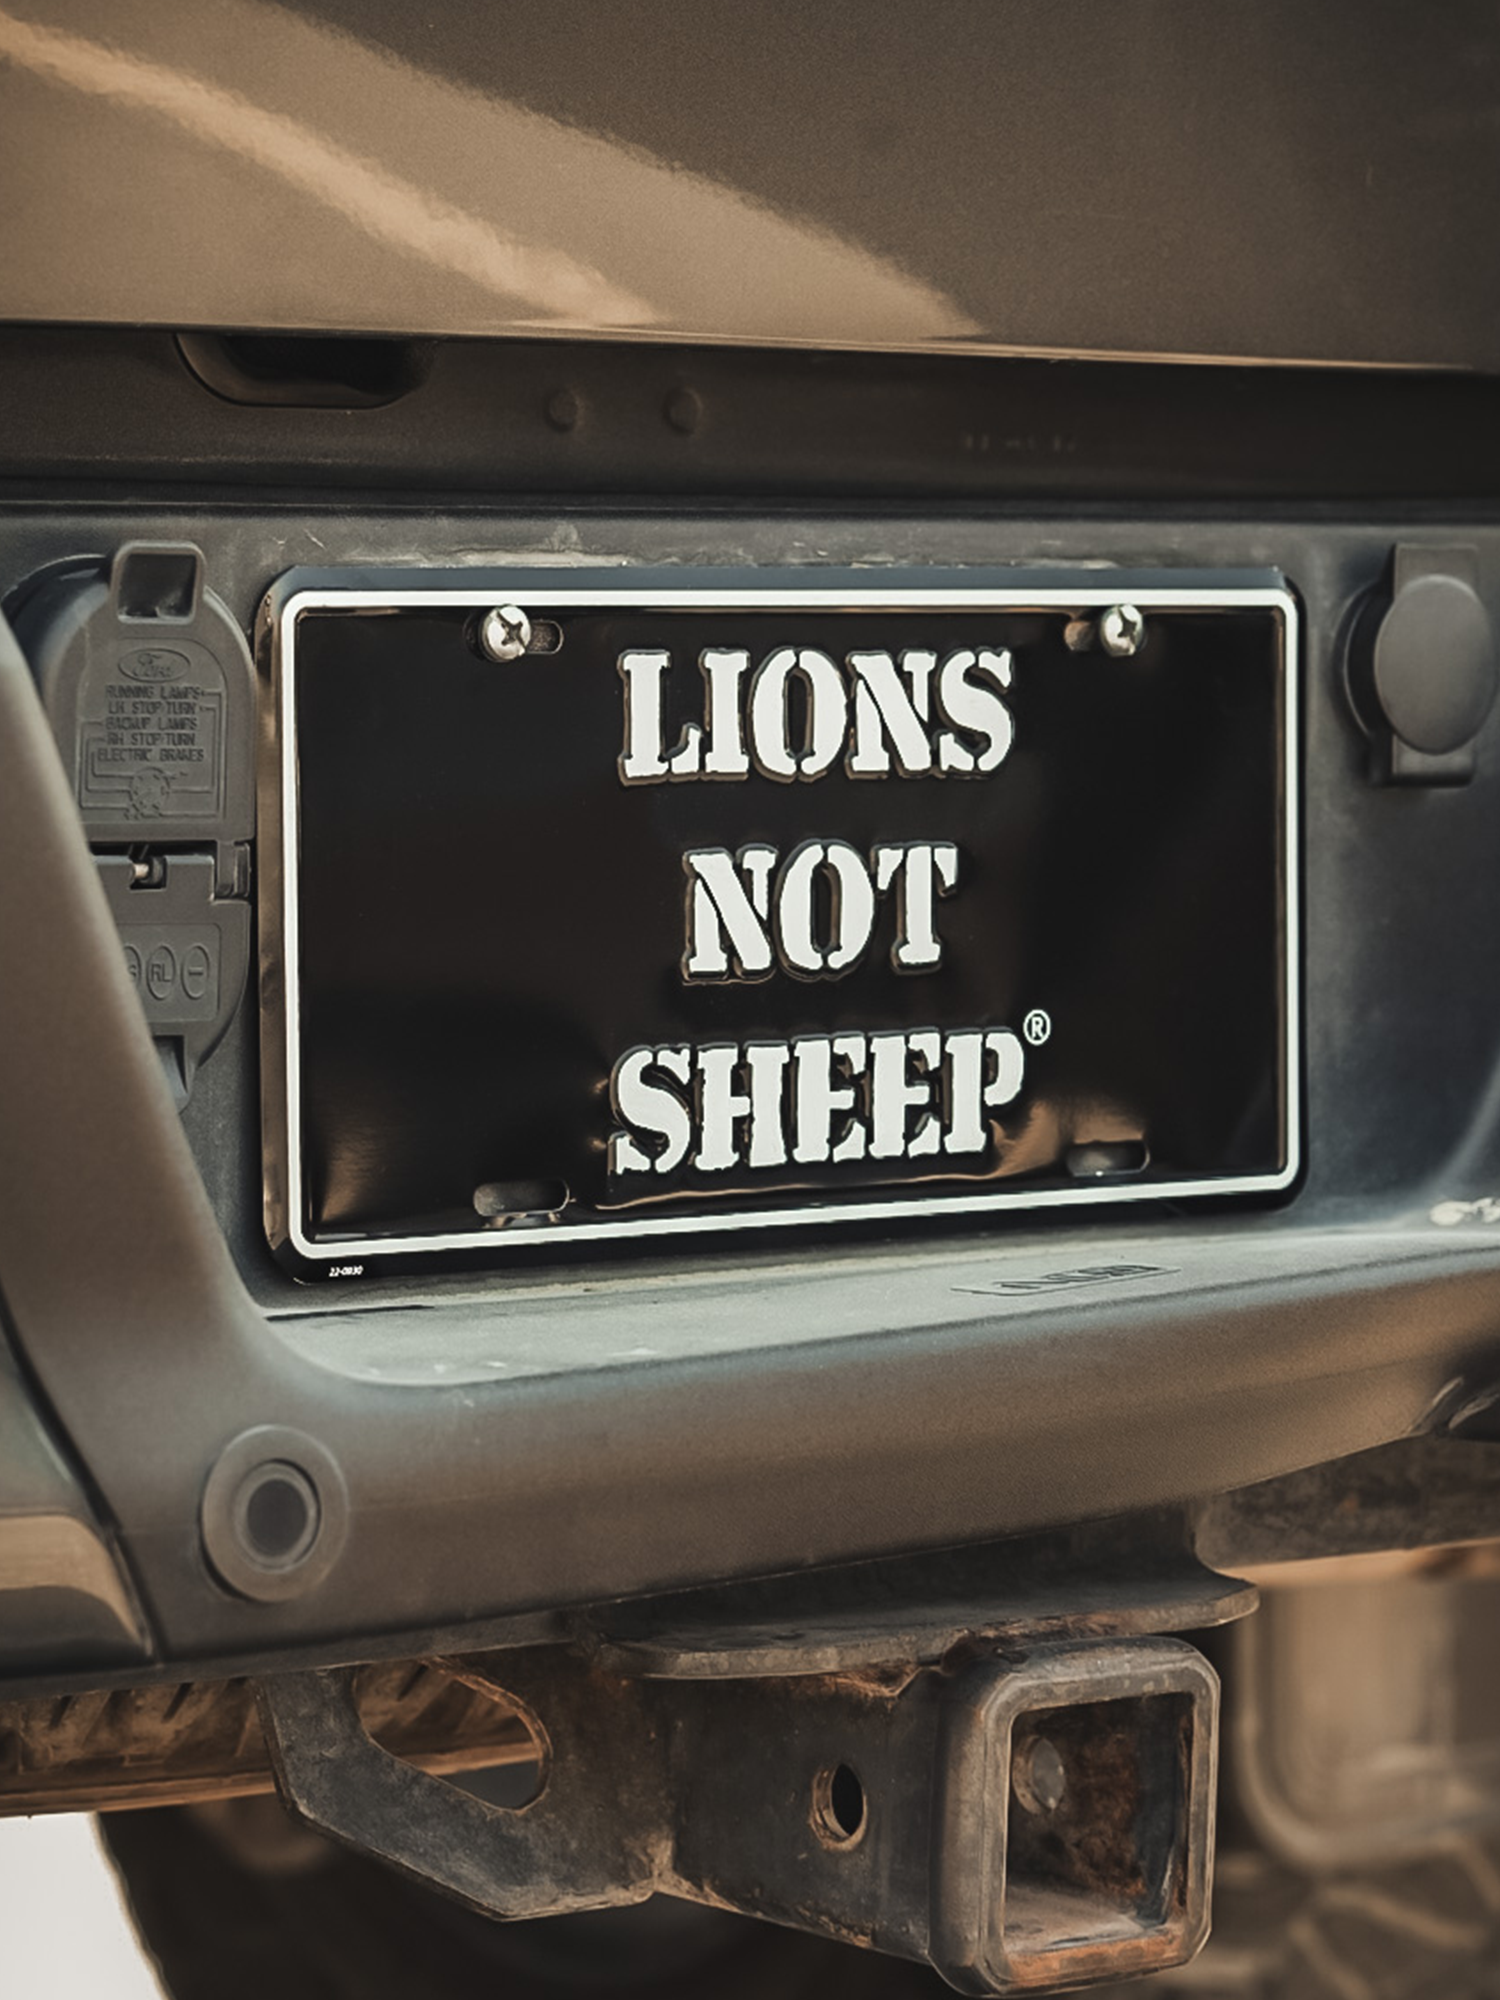 Lions Not Sheep "OG" License Plate - Lions Not Sheep ®